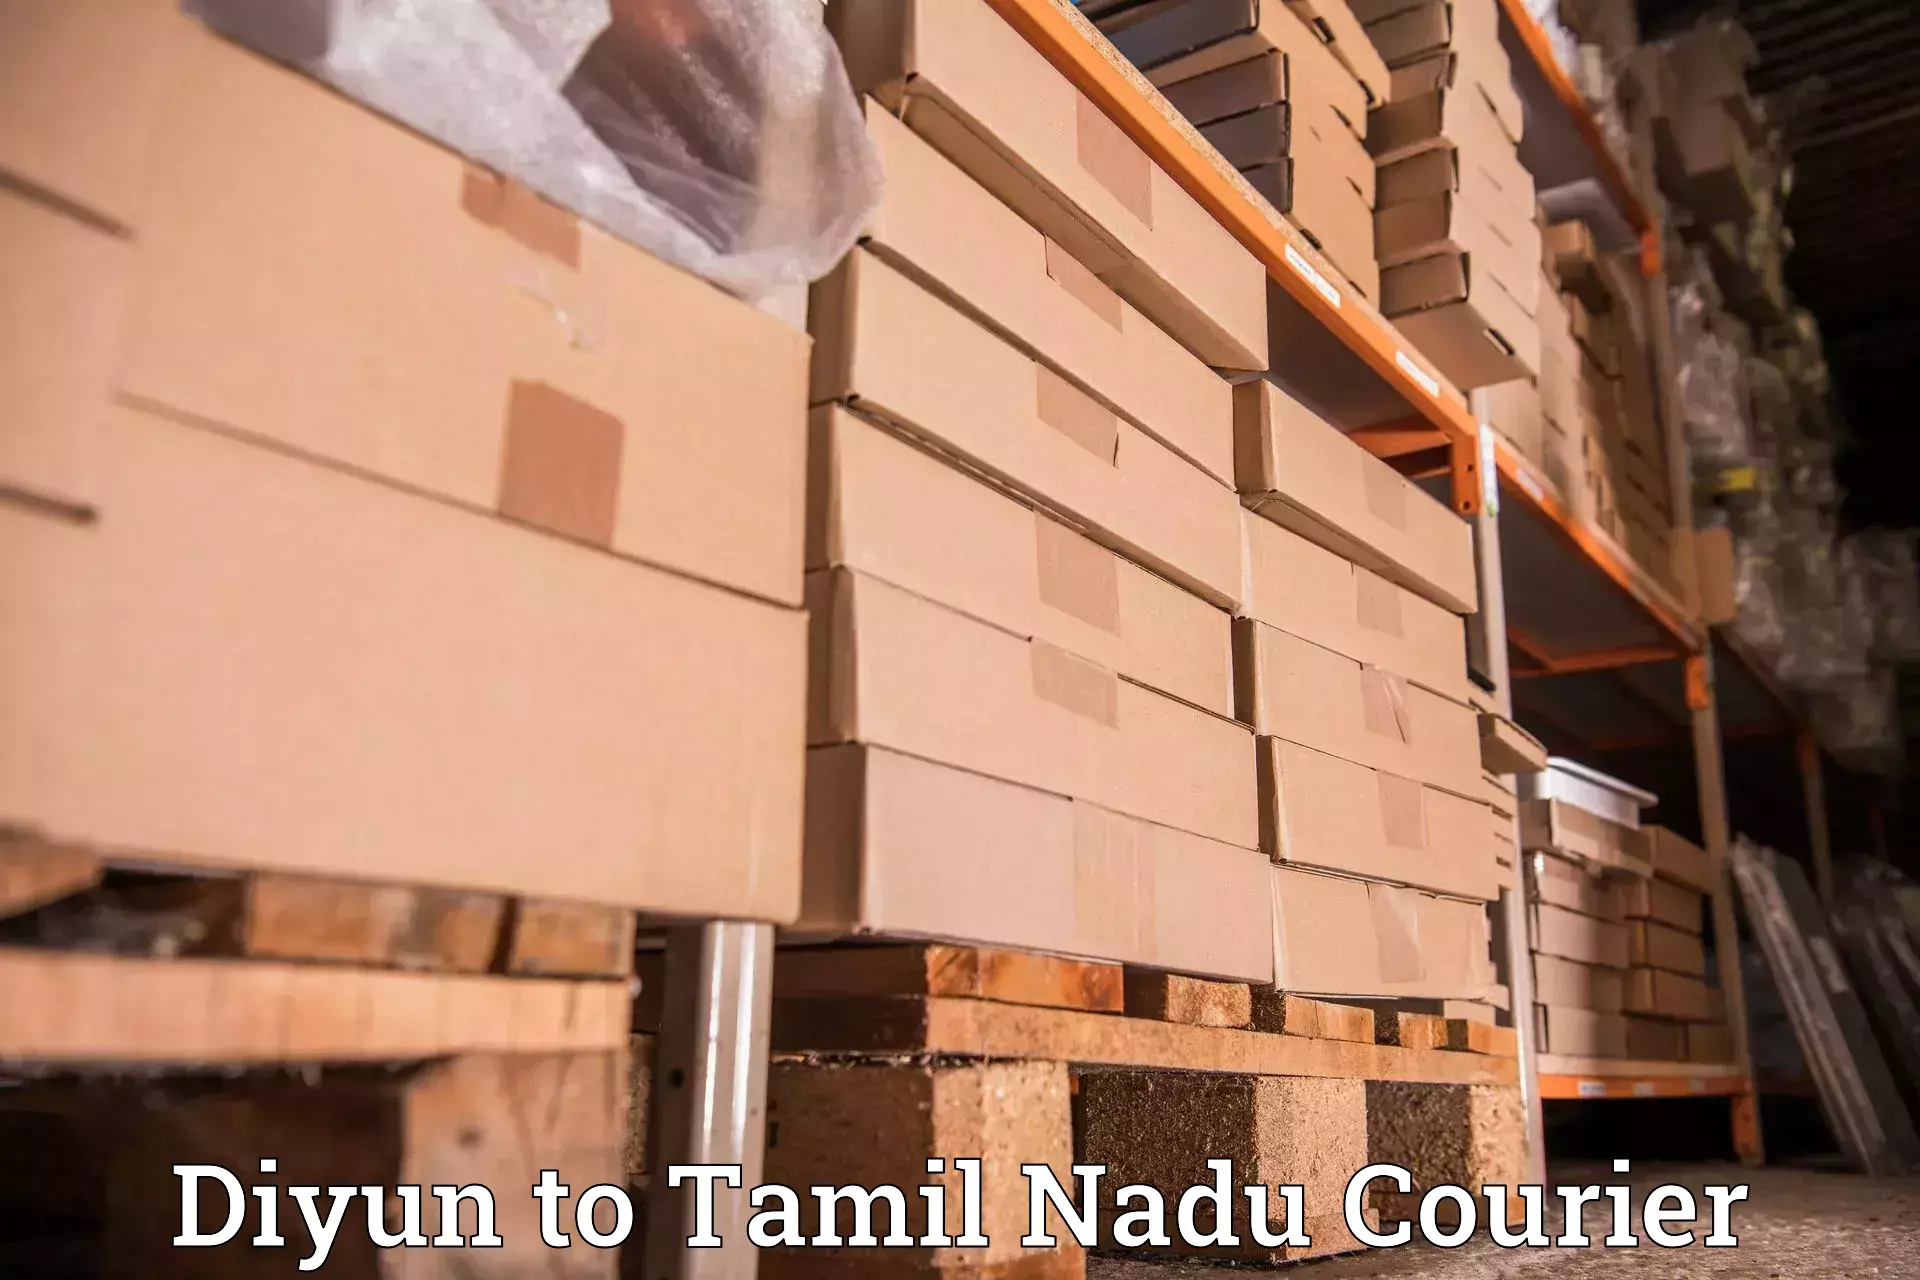 End-to-end delivery Diyun to Ambur